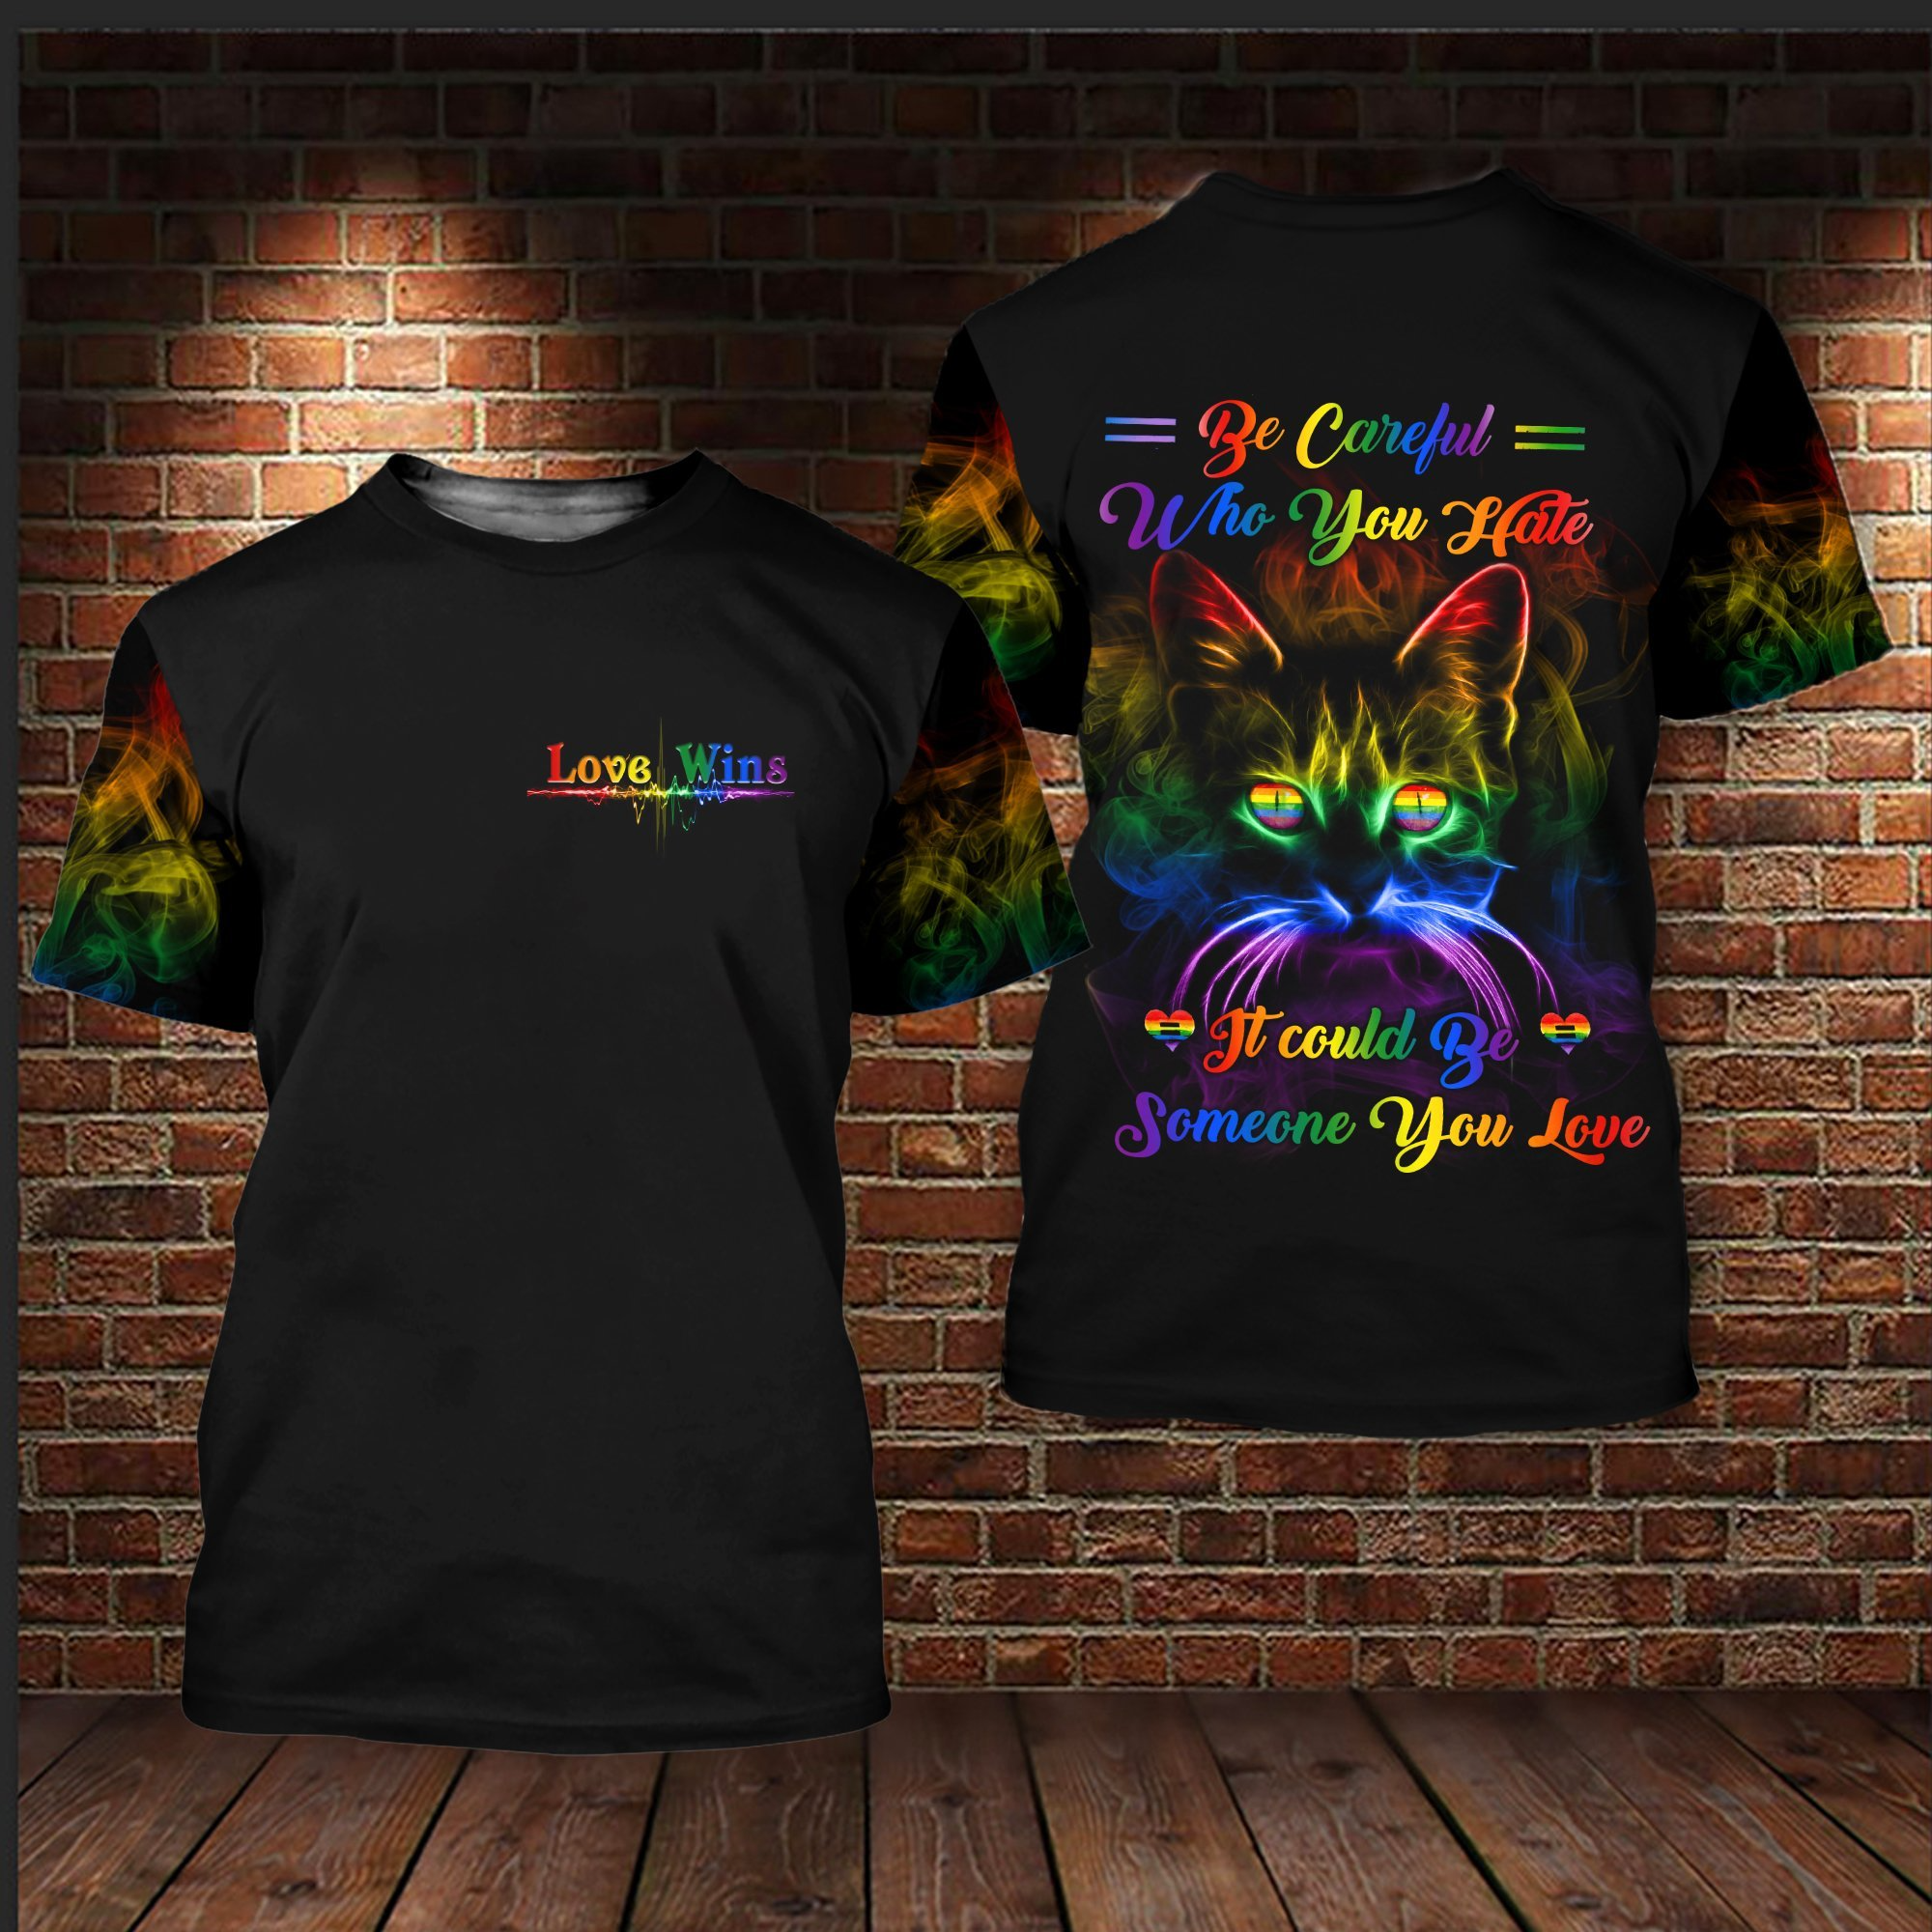 T Shirt For LGBT Pride Month/ Be Careful Who You Hate It Could Be Someone You Love